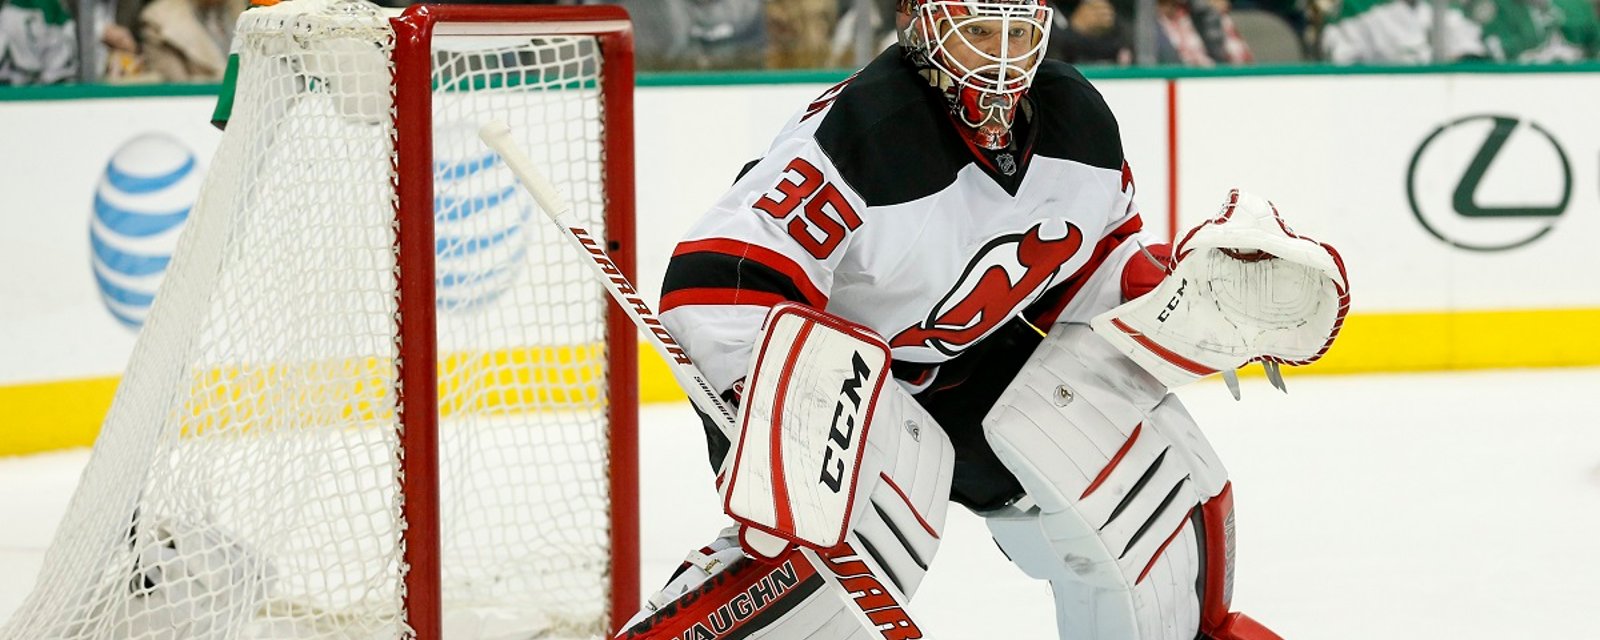 Breaking: Cory Schneider injured on Thursday, will not finish the game.